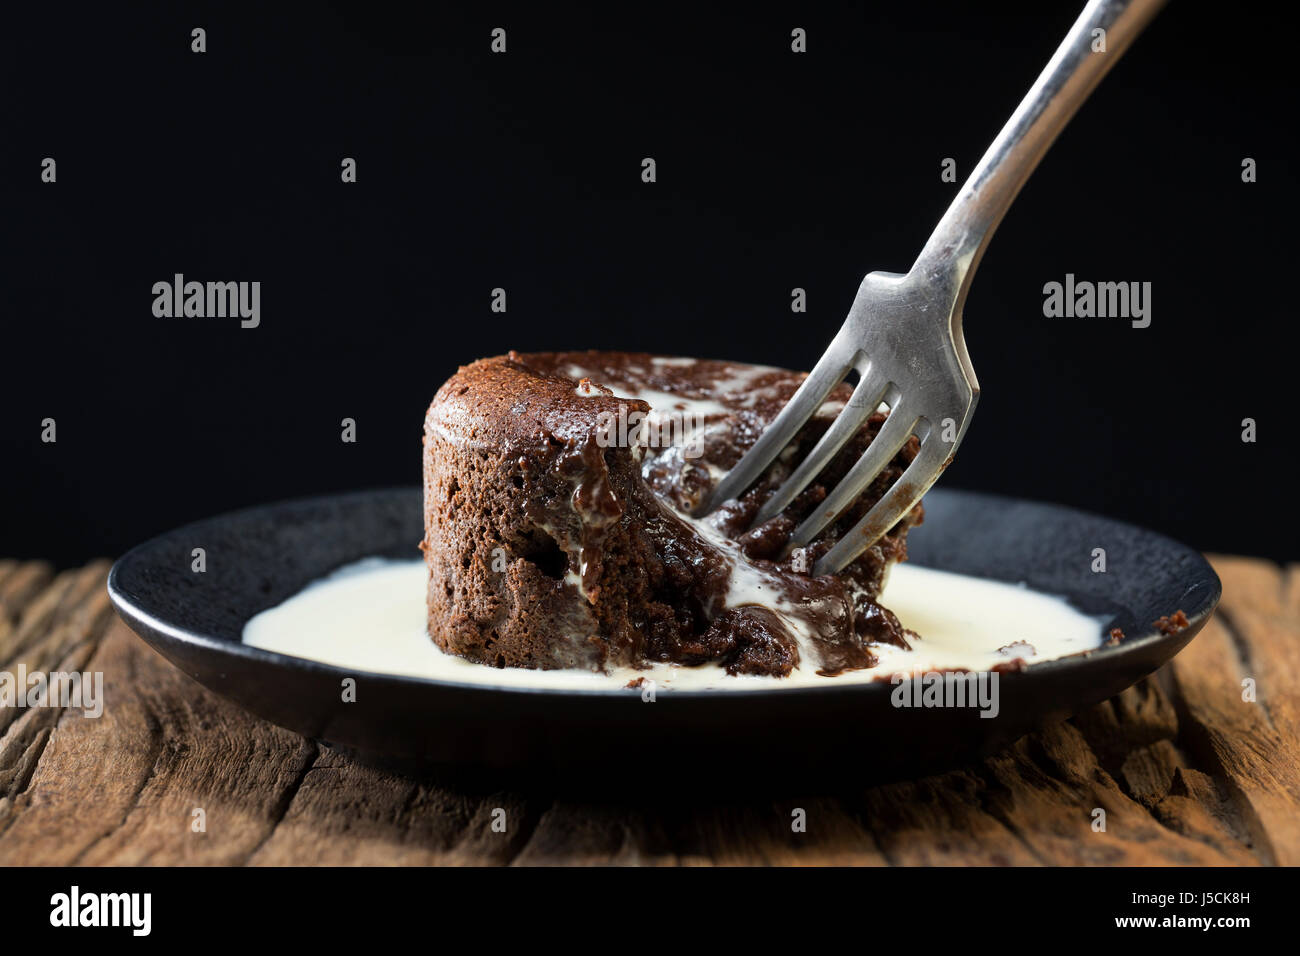 Chocolate Lava Cake and fresh cream. Chocolate pudding sitting on a rustic wooden table. Stock Photo